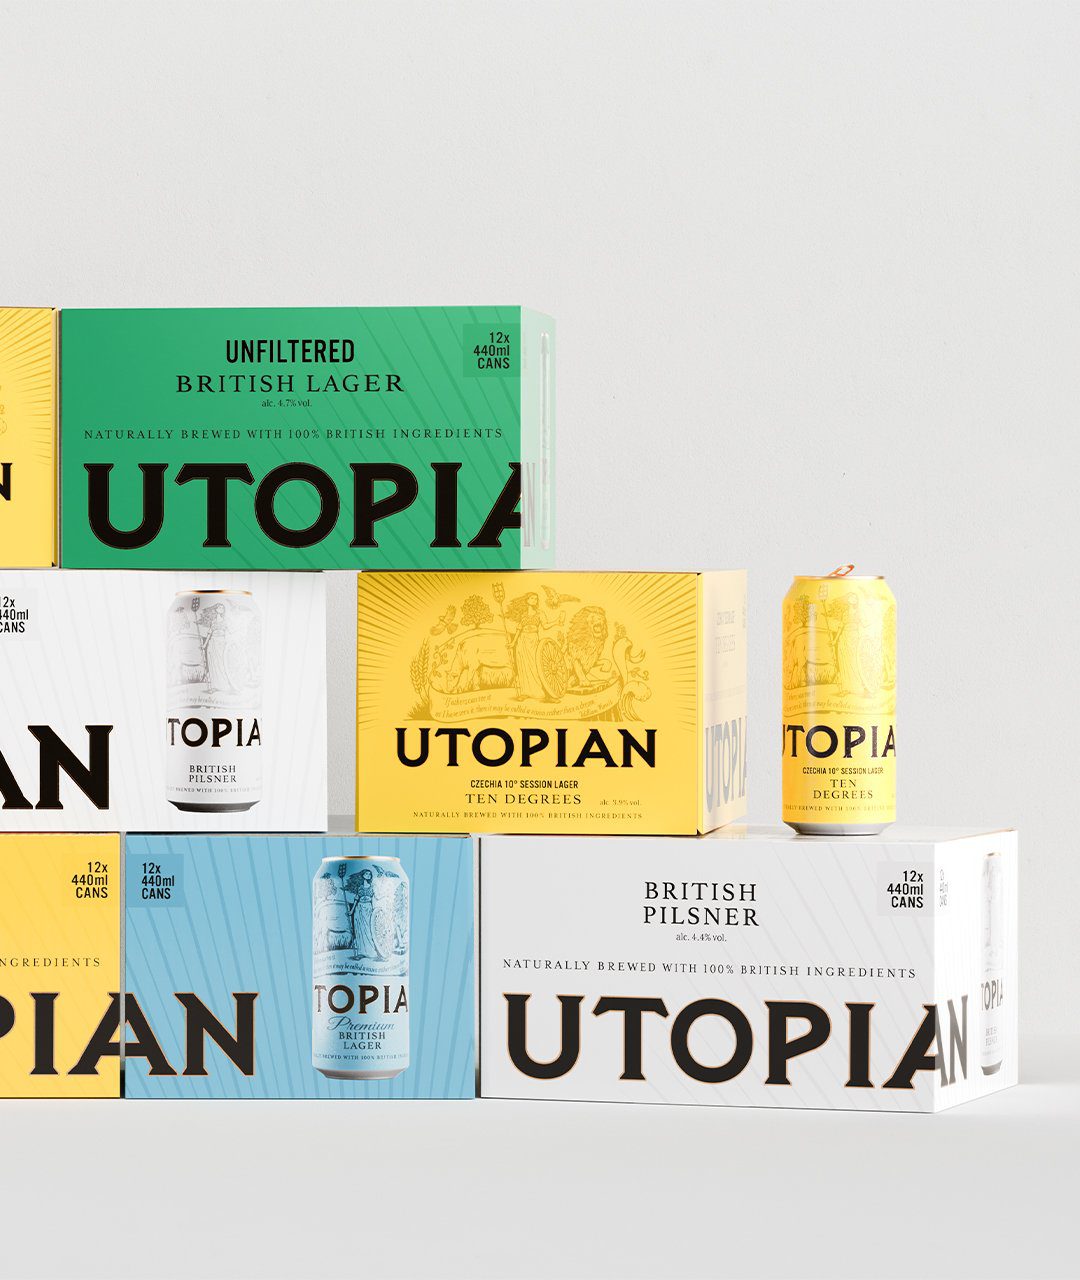 Utopian beer boxes and cans